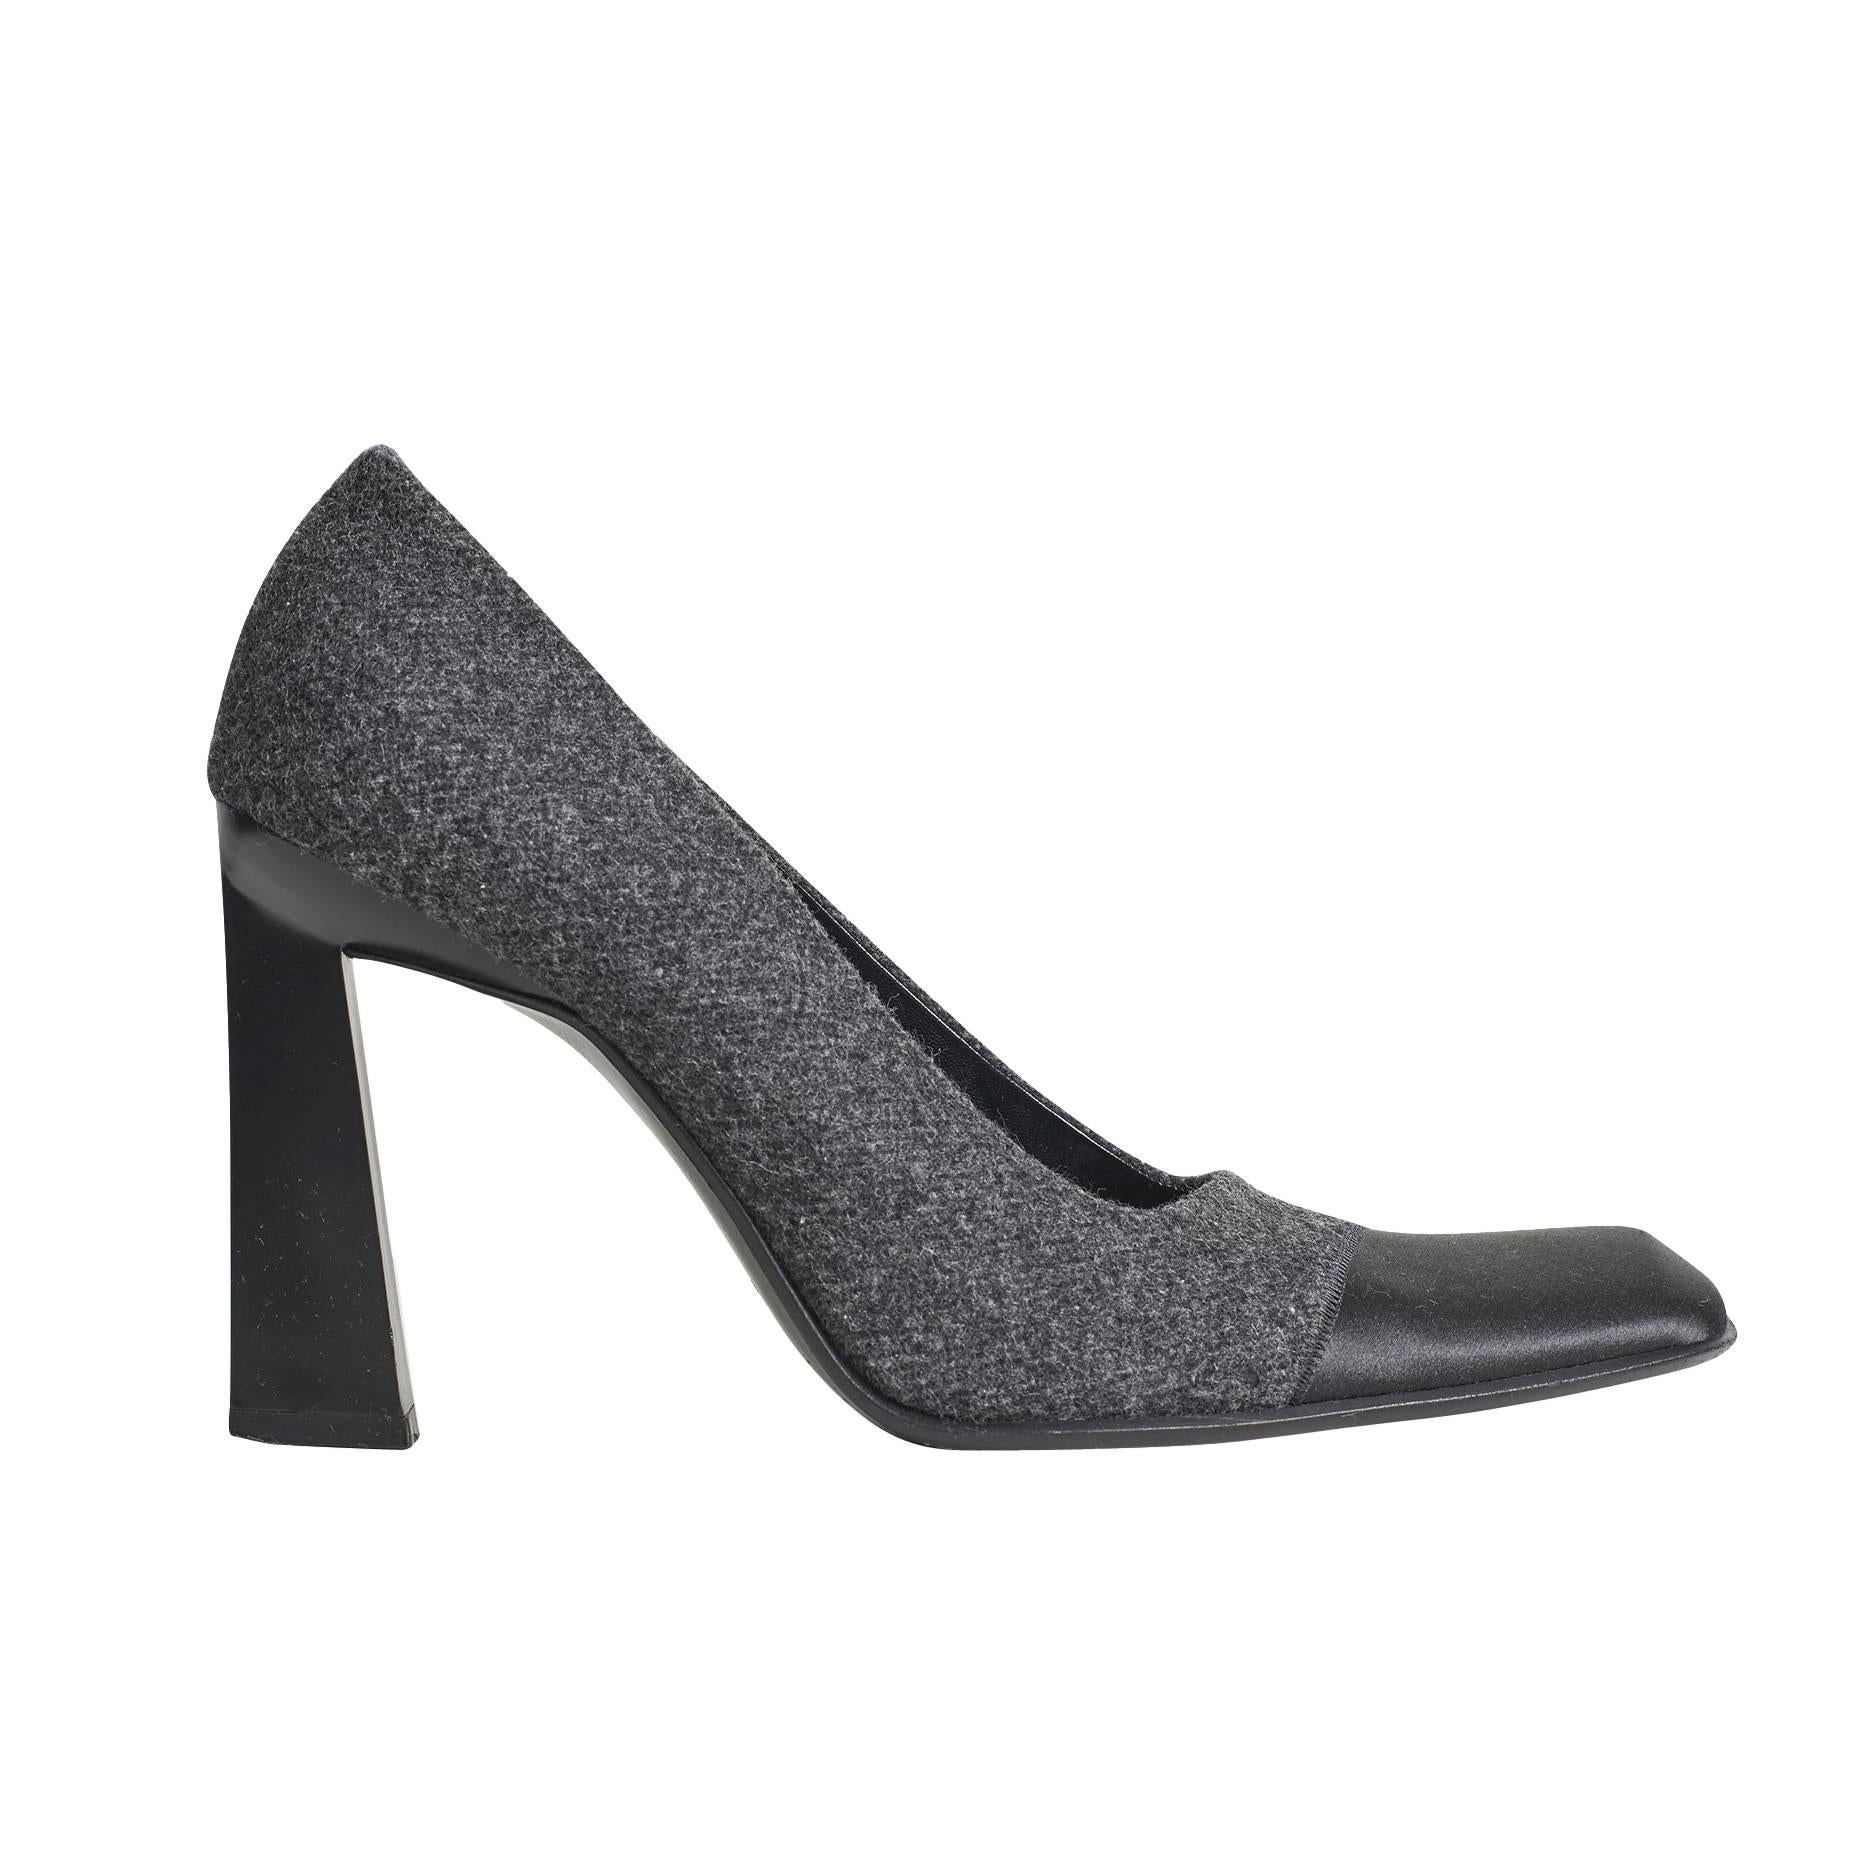 Prada Black and Grey High Heel Shoes For Sale